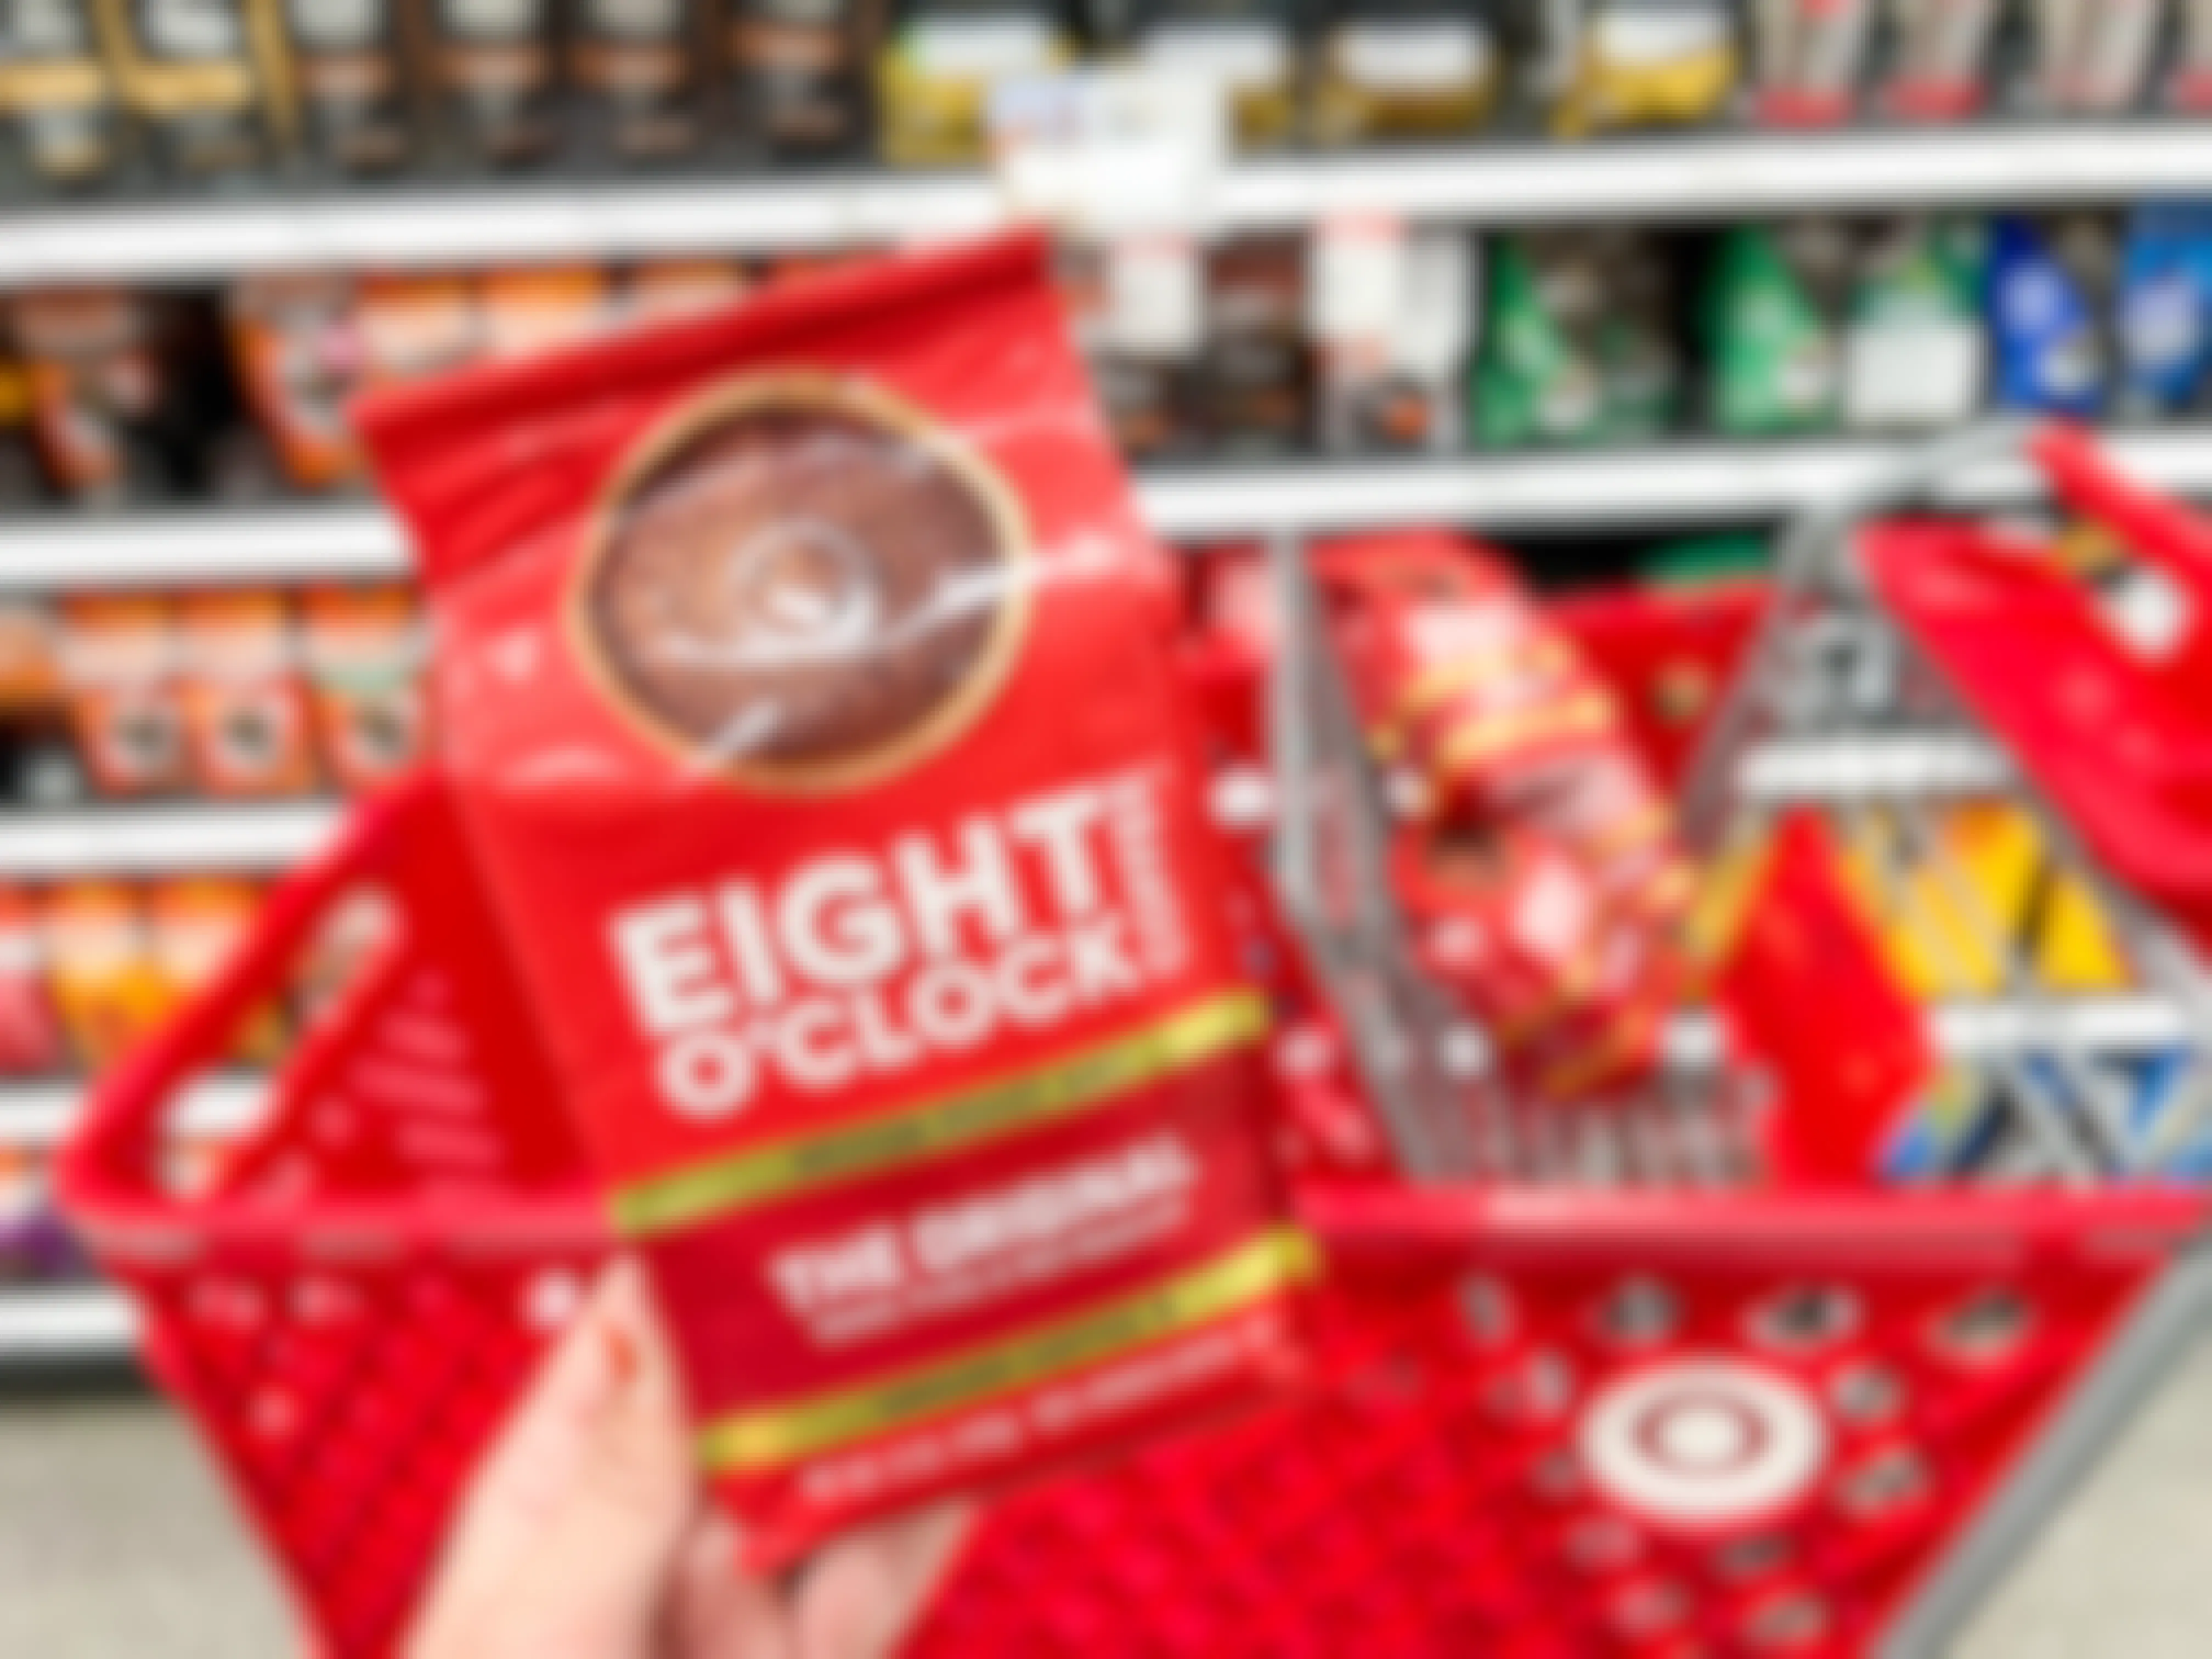 Eight O'Clock Ground Coffee, $2.98 at Target